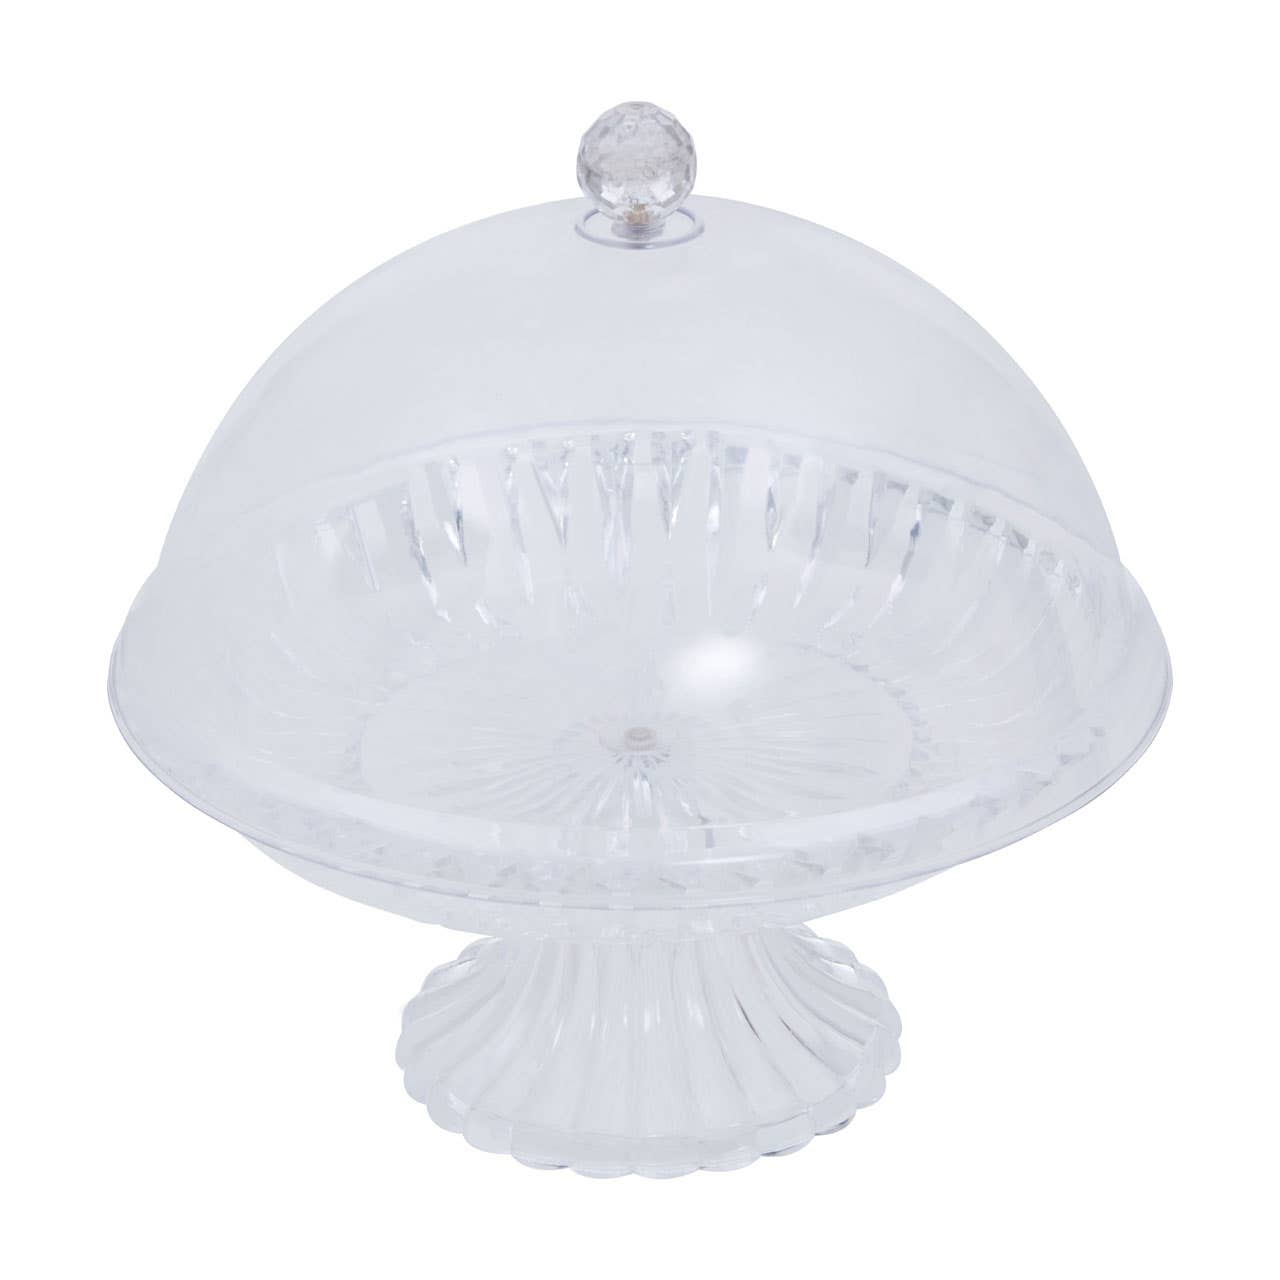 Dome Lid Cake Stand